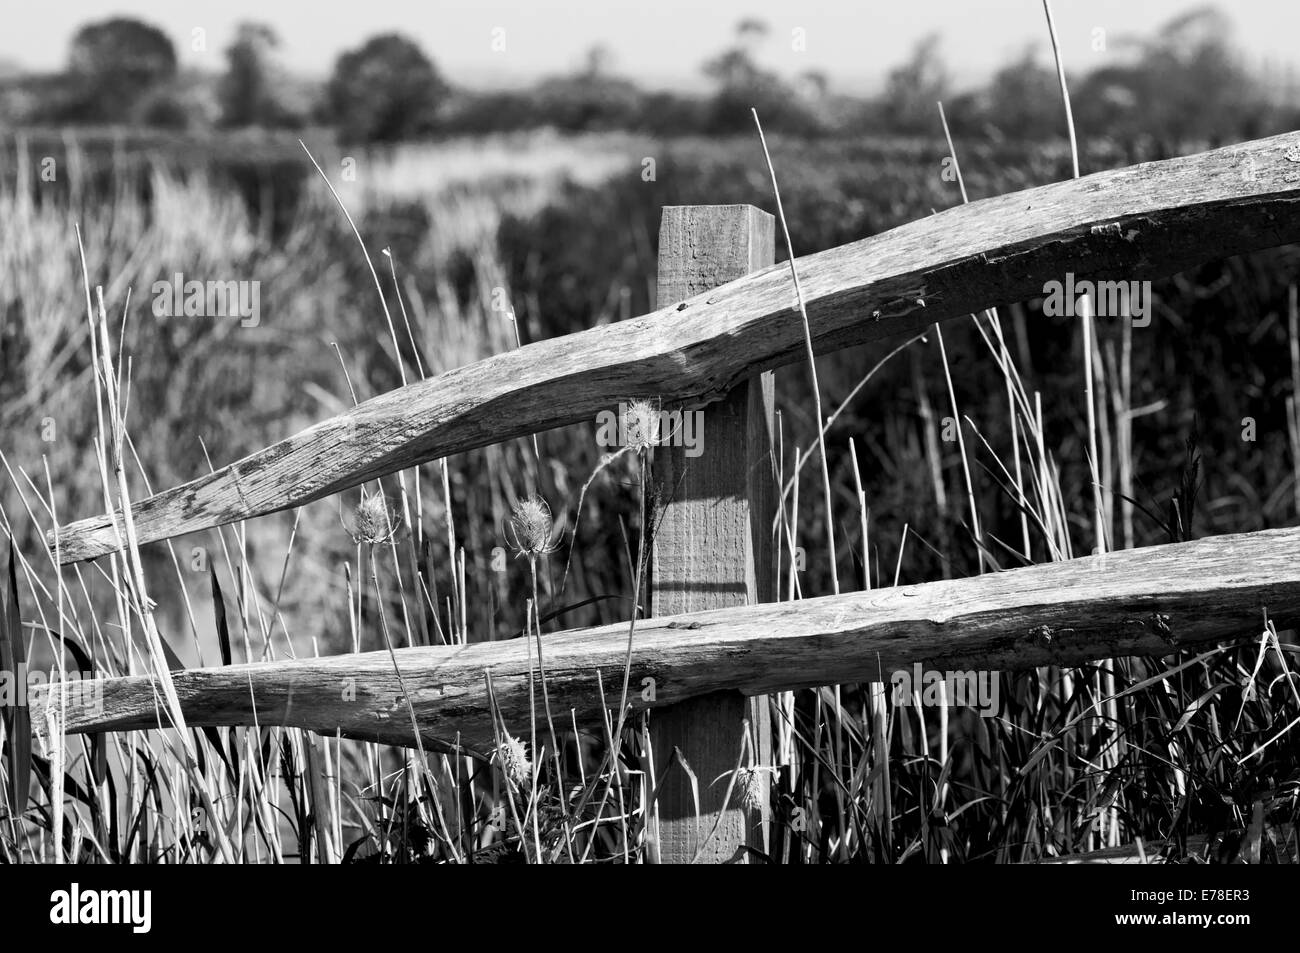 Black and white close up of a wooden fence on the edge of a reeded ditch at Amberley Stock Photo